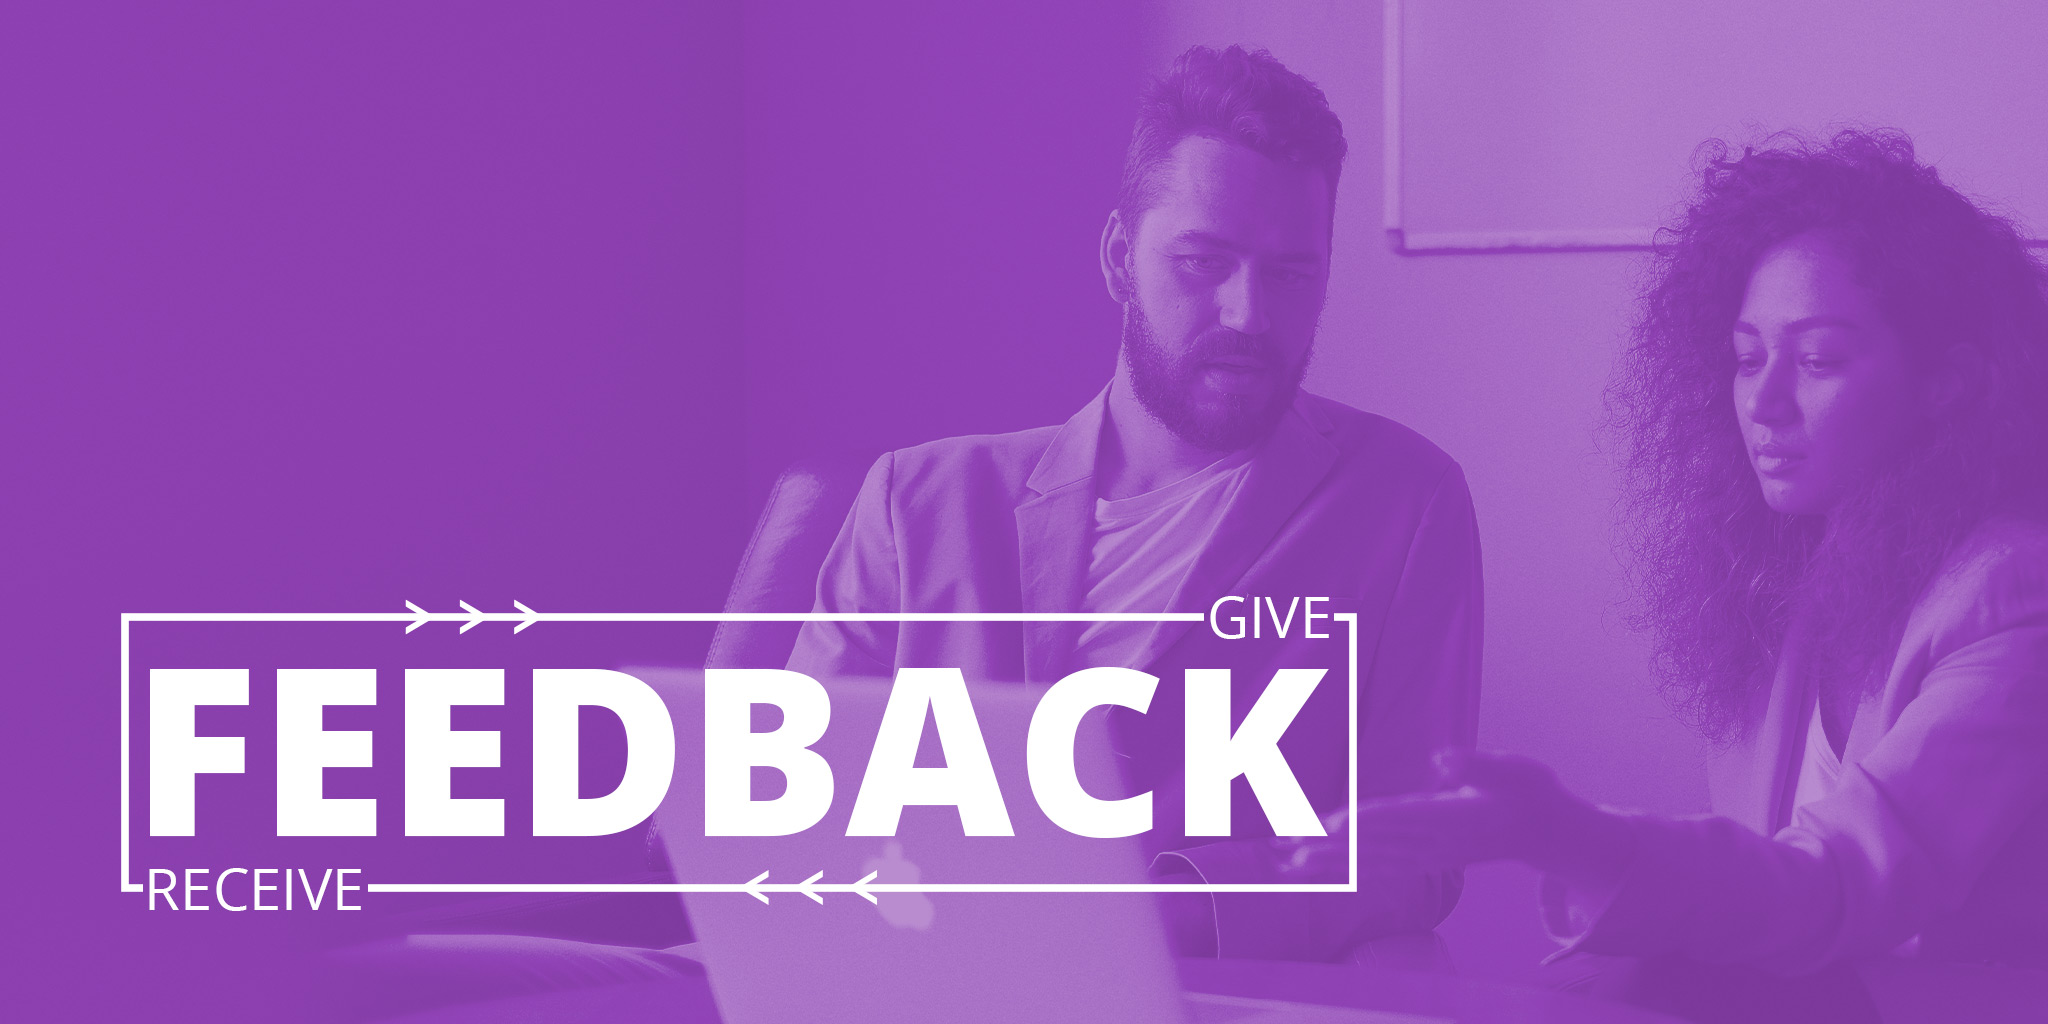 How to receive and give feedback